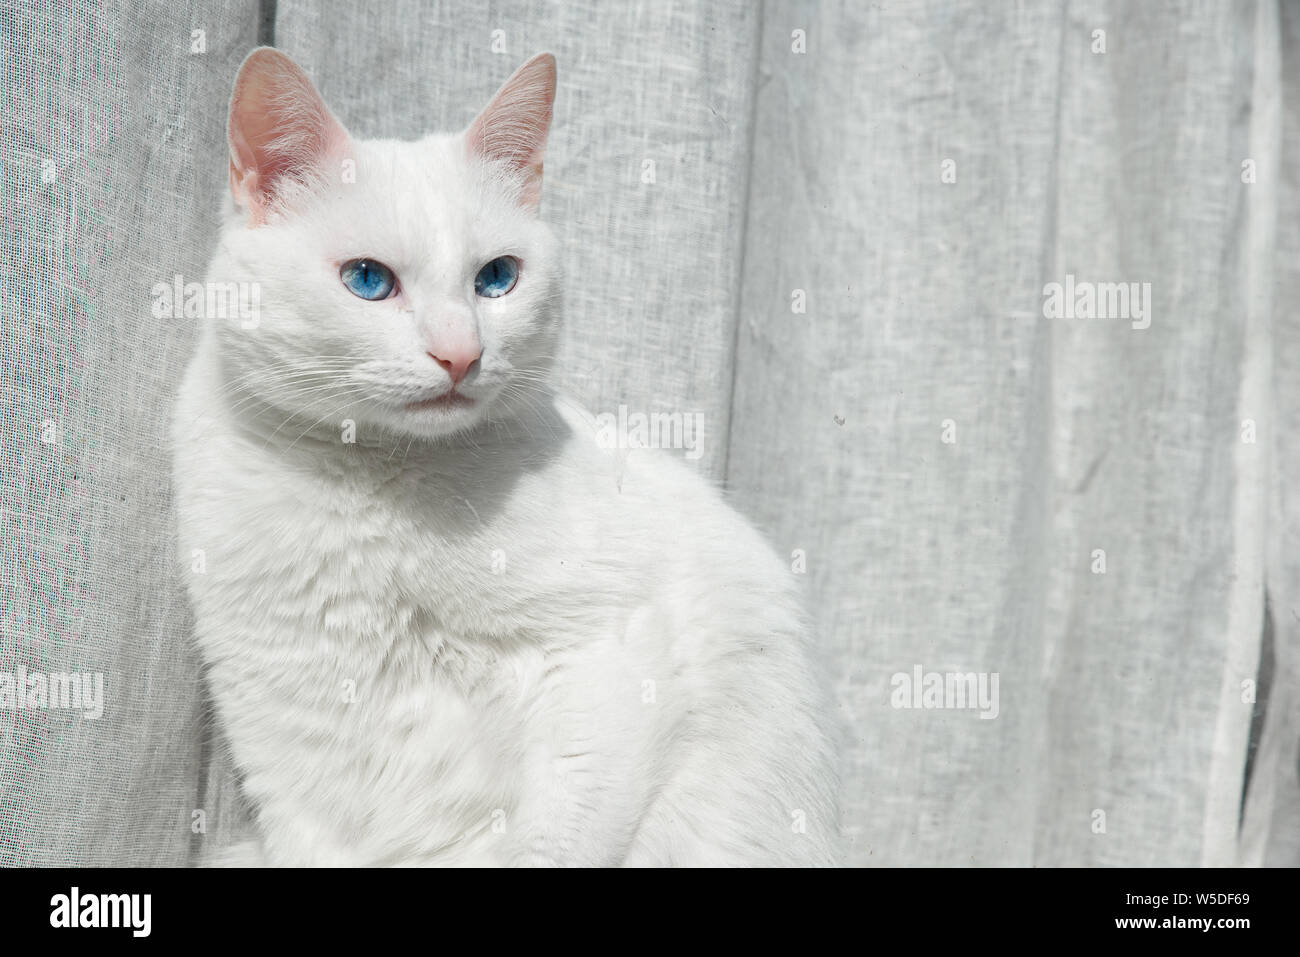 A white cat with blue eyes in front of grey curtain Stock Photo